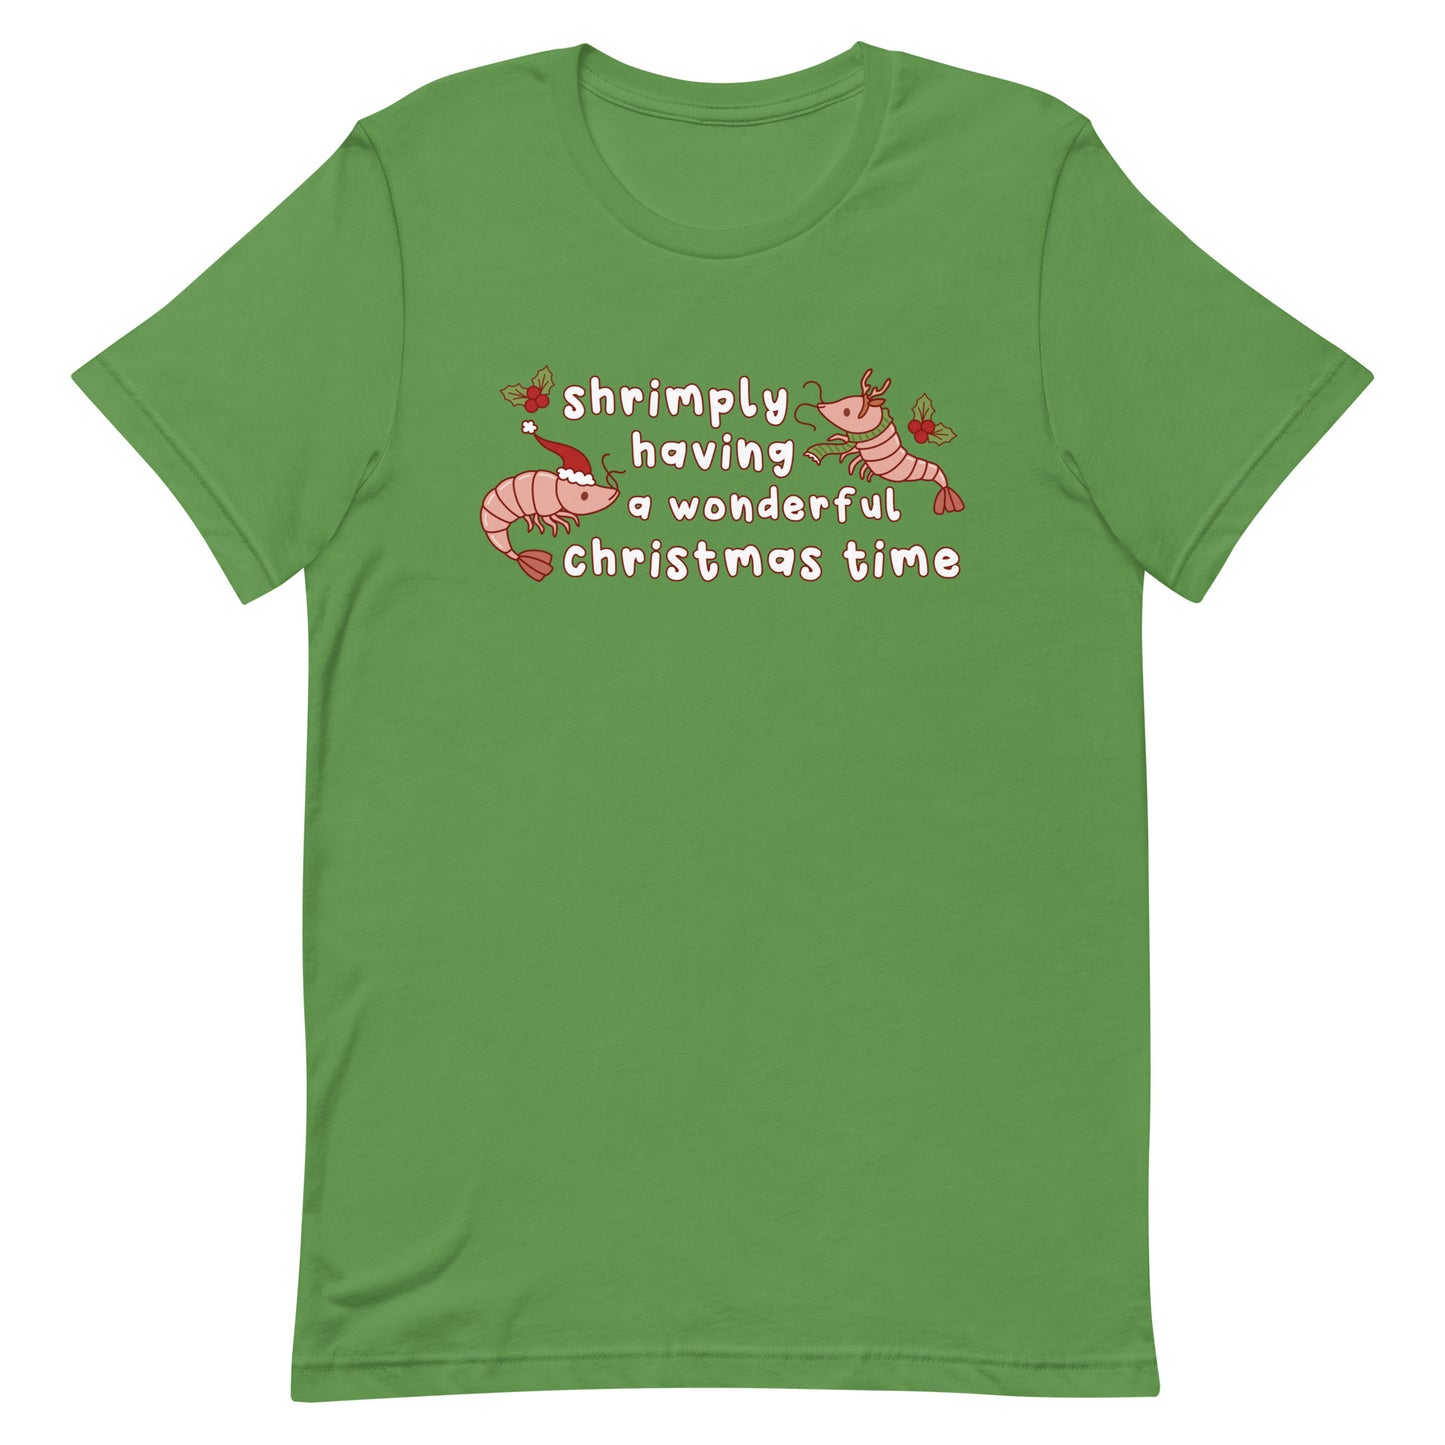 A green crewneck t-shirt featuring an illustration of two festive shrimp - one with a Santa hat, and one with reindeer antlers. Text between the shrimp reads "shrimply having a wonderful Christmas time".